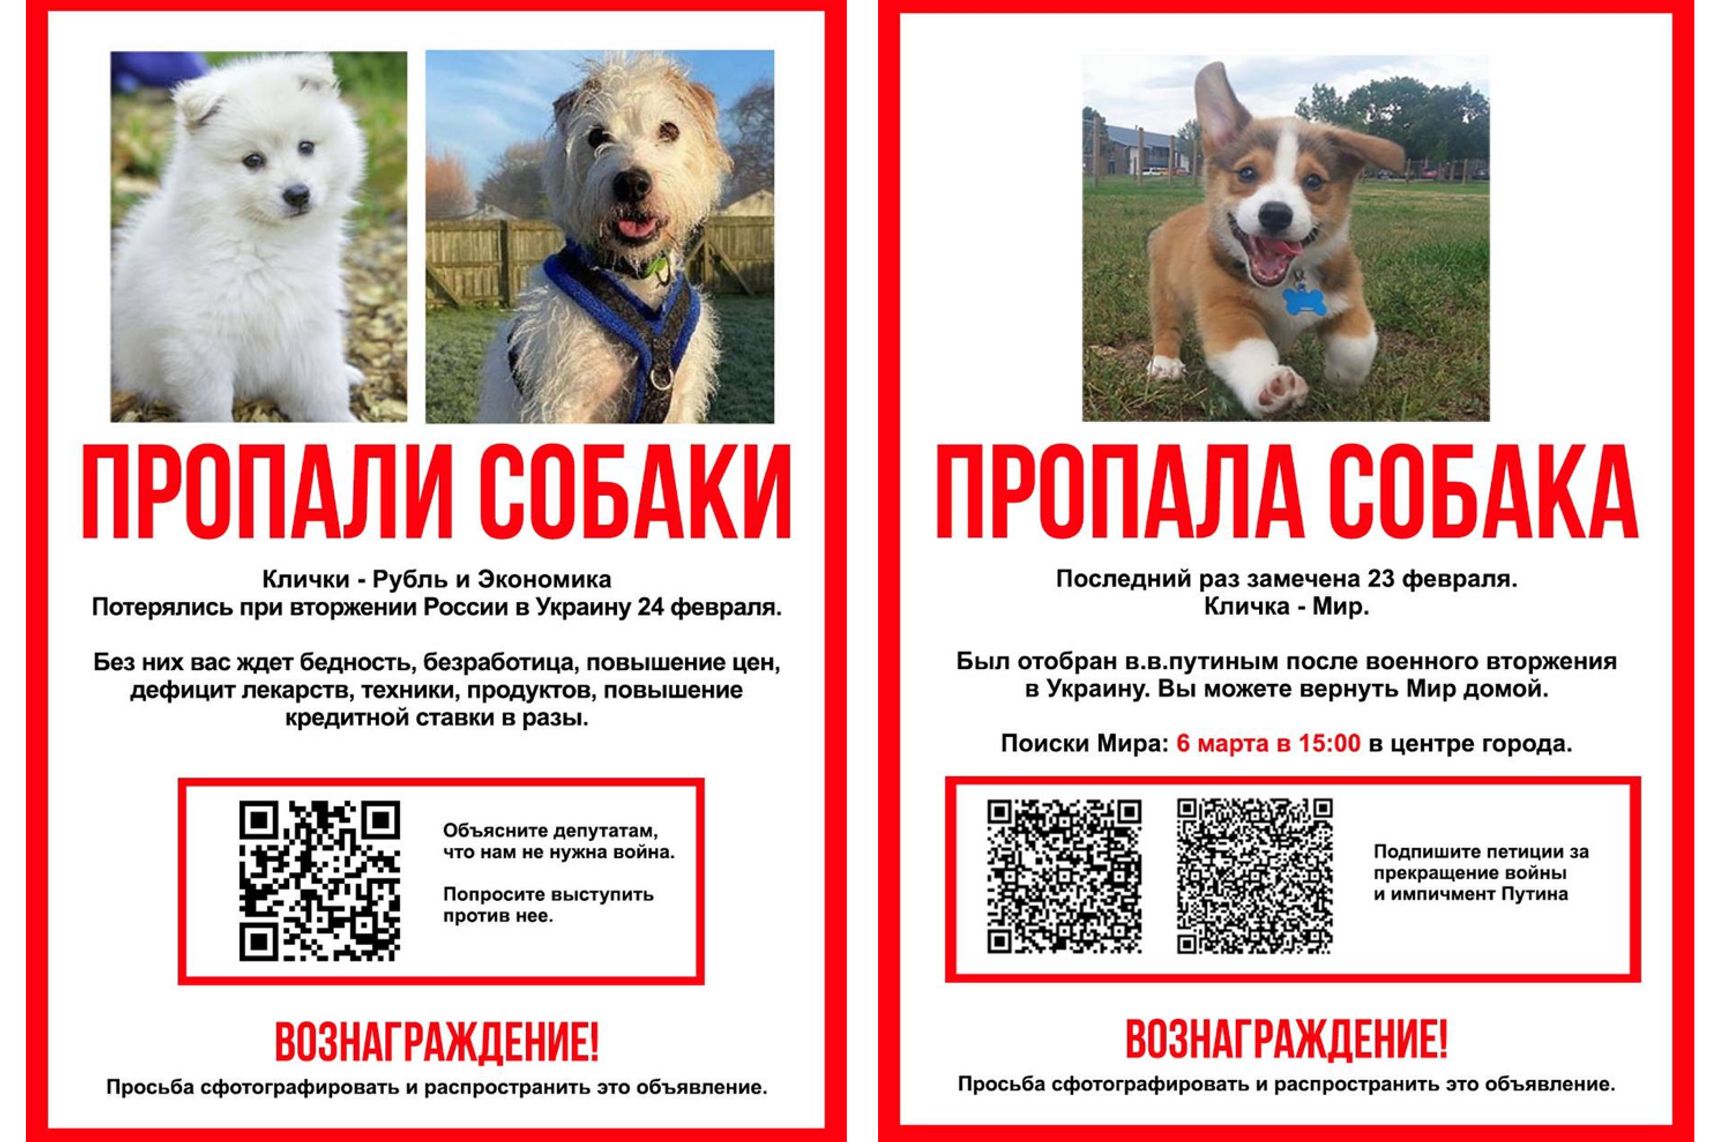 “Dogs missing. Ruble and Economy. Last seen on February 24, when Putin invaded Ukraine. Without them, you get poverty, unemployment, soaring prices, shortages of drugs, electronics, food, and manifold increases of interest rates. Tell your deputy you don’t need war. Ask them to oppose it. Reward guaranteed! Please spread the word.” “Dog missing. Answers to the name of ‘Peace’. Last seen on February 23. Putin took him away when his troops invaded Ukraine. You can bring Peace back home. Looking for Peace: March 6, 15:00, city center. Sign the petitions to stop the war and impeach Vladimir Putin. Reward guaranteed! Please spread the word.”